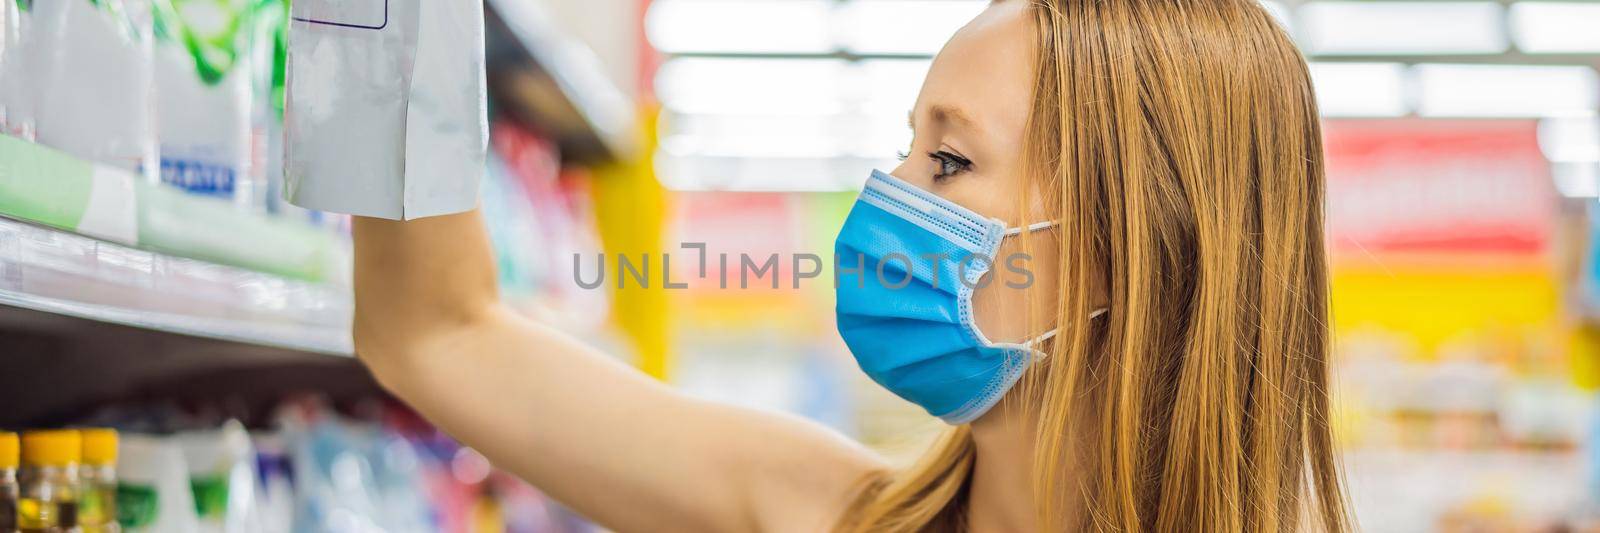 Alarmed female wears medical mask against coronavirus while grocery shopping in supermarket or store- health, safety and pandemic concept - young woman wearing protective mask and stockpiling food. BANNER, LONG FORMAT